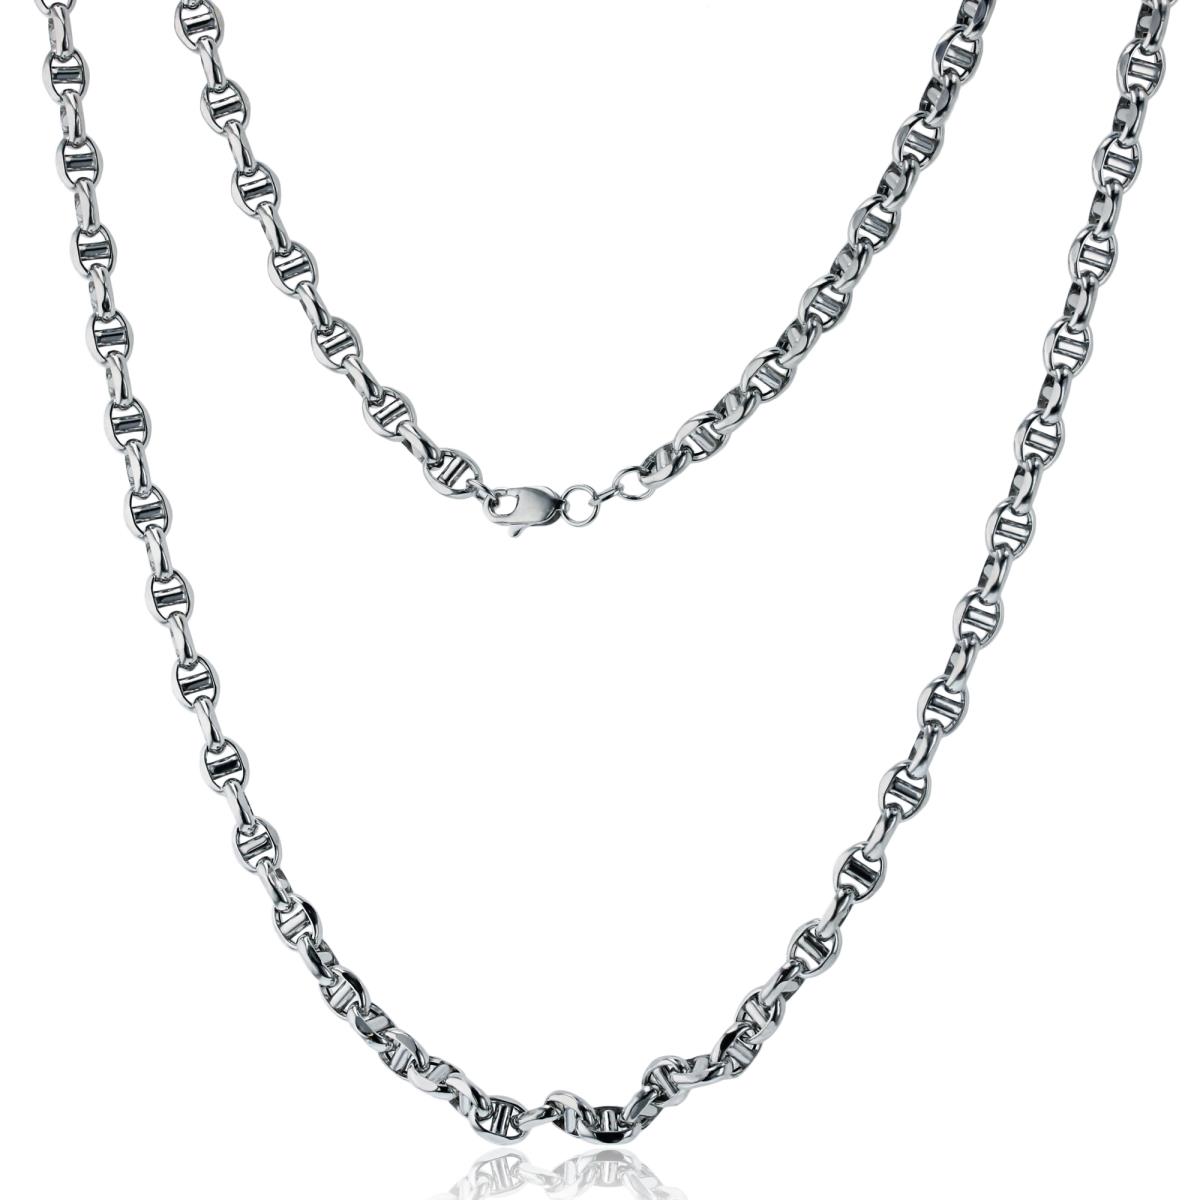 10K White Gold Polished 5.00mm 24" Hollow Filk Chain